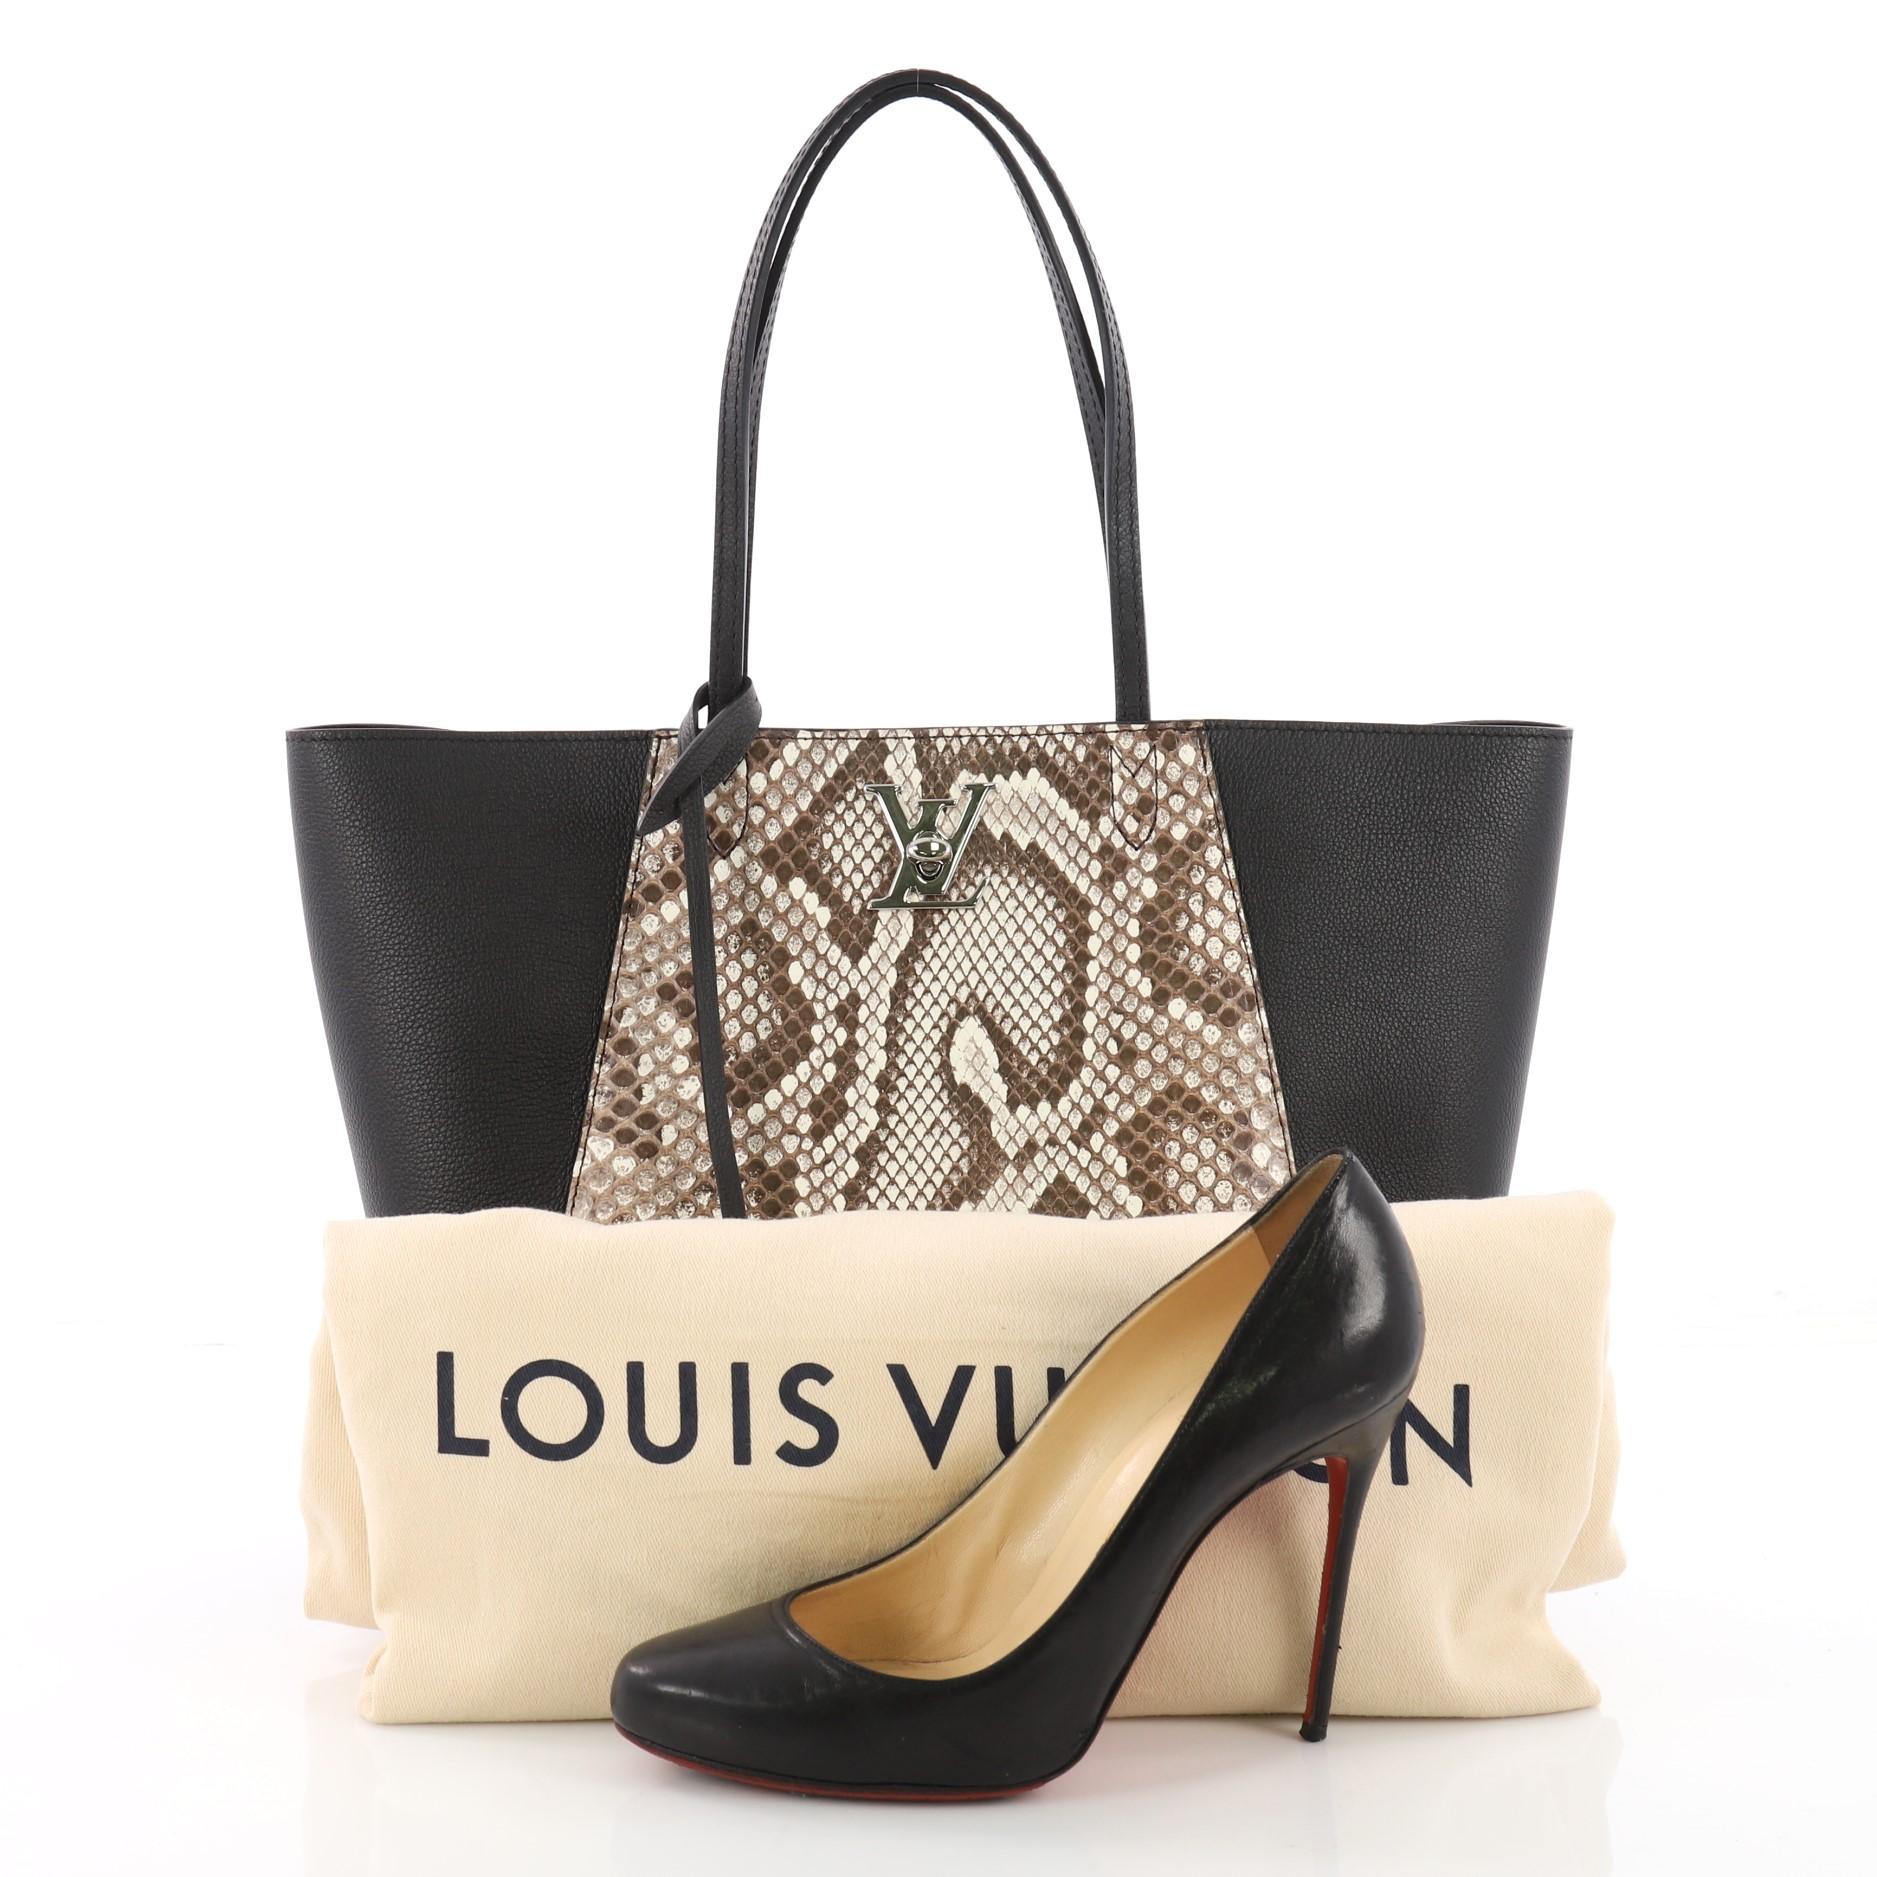 This authentic Louis Vuitton Lockme Cabas Leather and Python is a gorgeous and sophisticated bag. Crafted from black leather and genuine beige python, this bag features dual flat leather handles, LV twist closure, and silver-tone hardware accents.